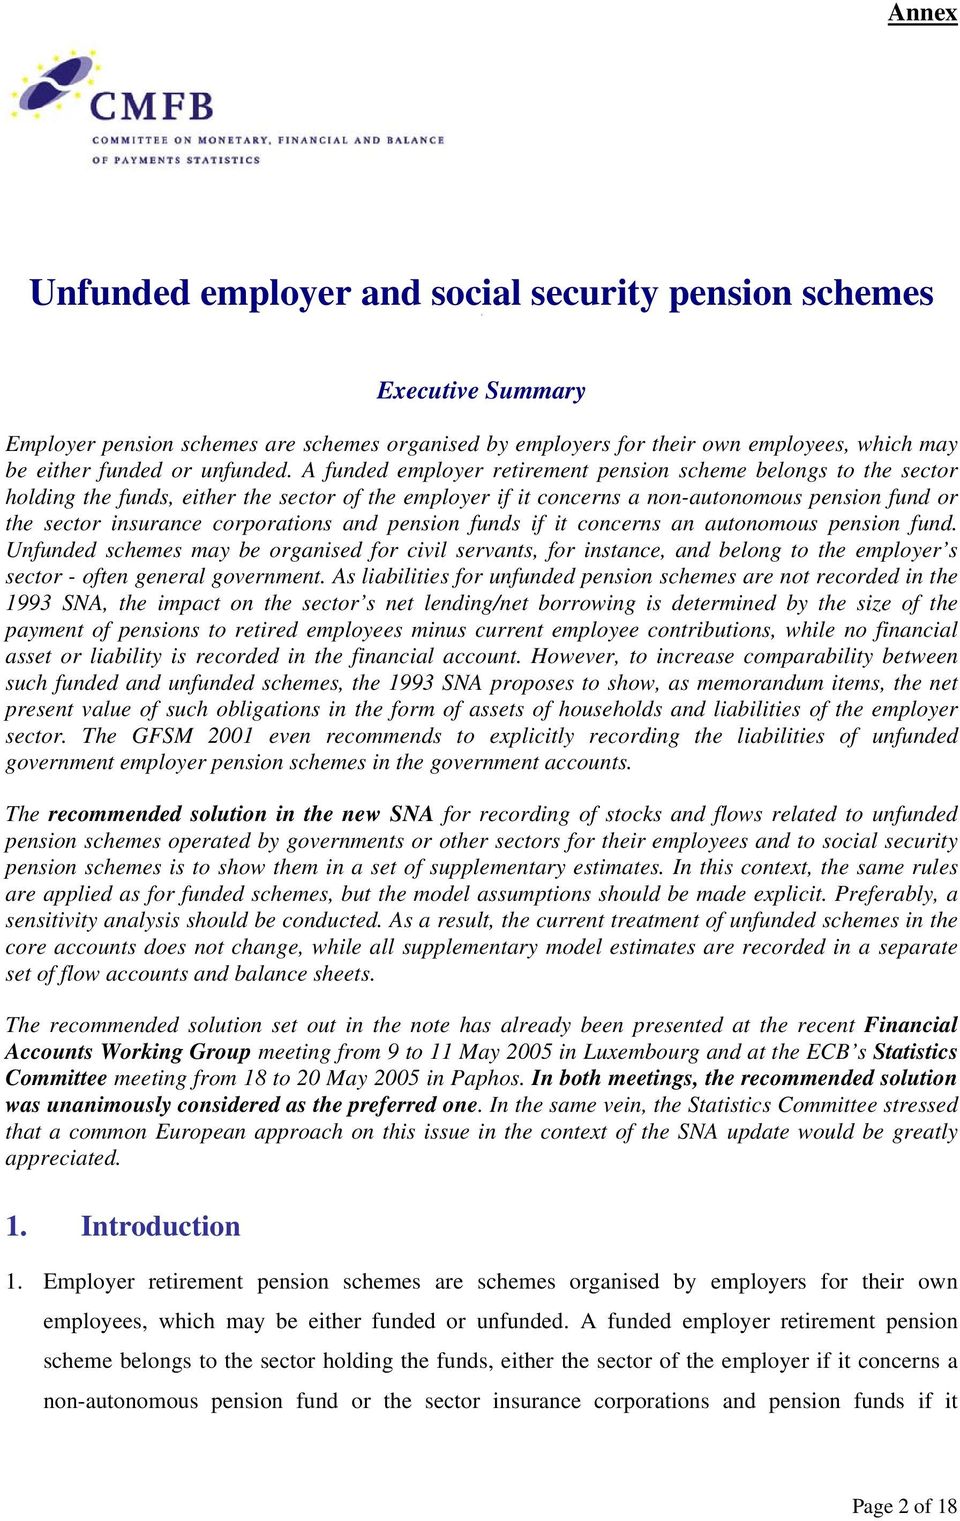 A funded employer retirement pension scheme belongs to the sector holding the funds, either the sector of the employer if it concerns a non-autonomous pension fund or the sector insurance